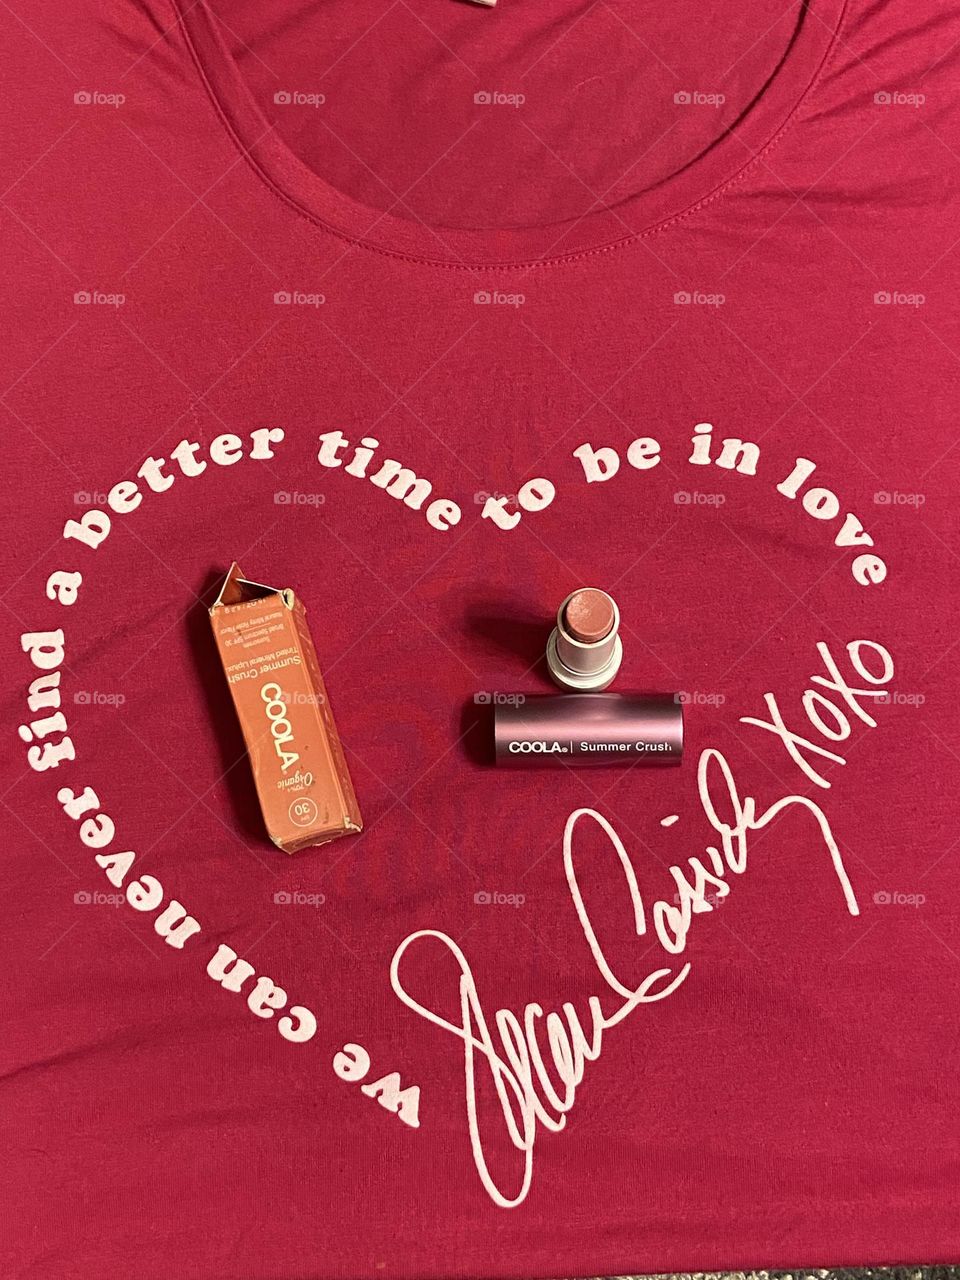 Coola lipstick with SPF30 in “Summer Crush” partnered with a concert T-shirt celebrating one of my lifelong crushes, Shaun Cassidy, who I saw perform at Parx Casino in Philadelphia on Dec 16, 2021 after several postponements due to Covid.  